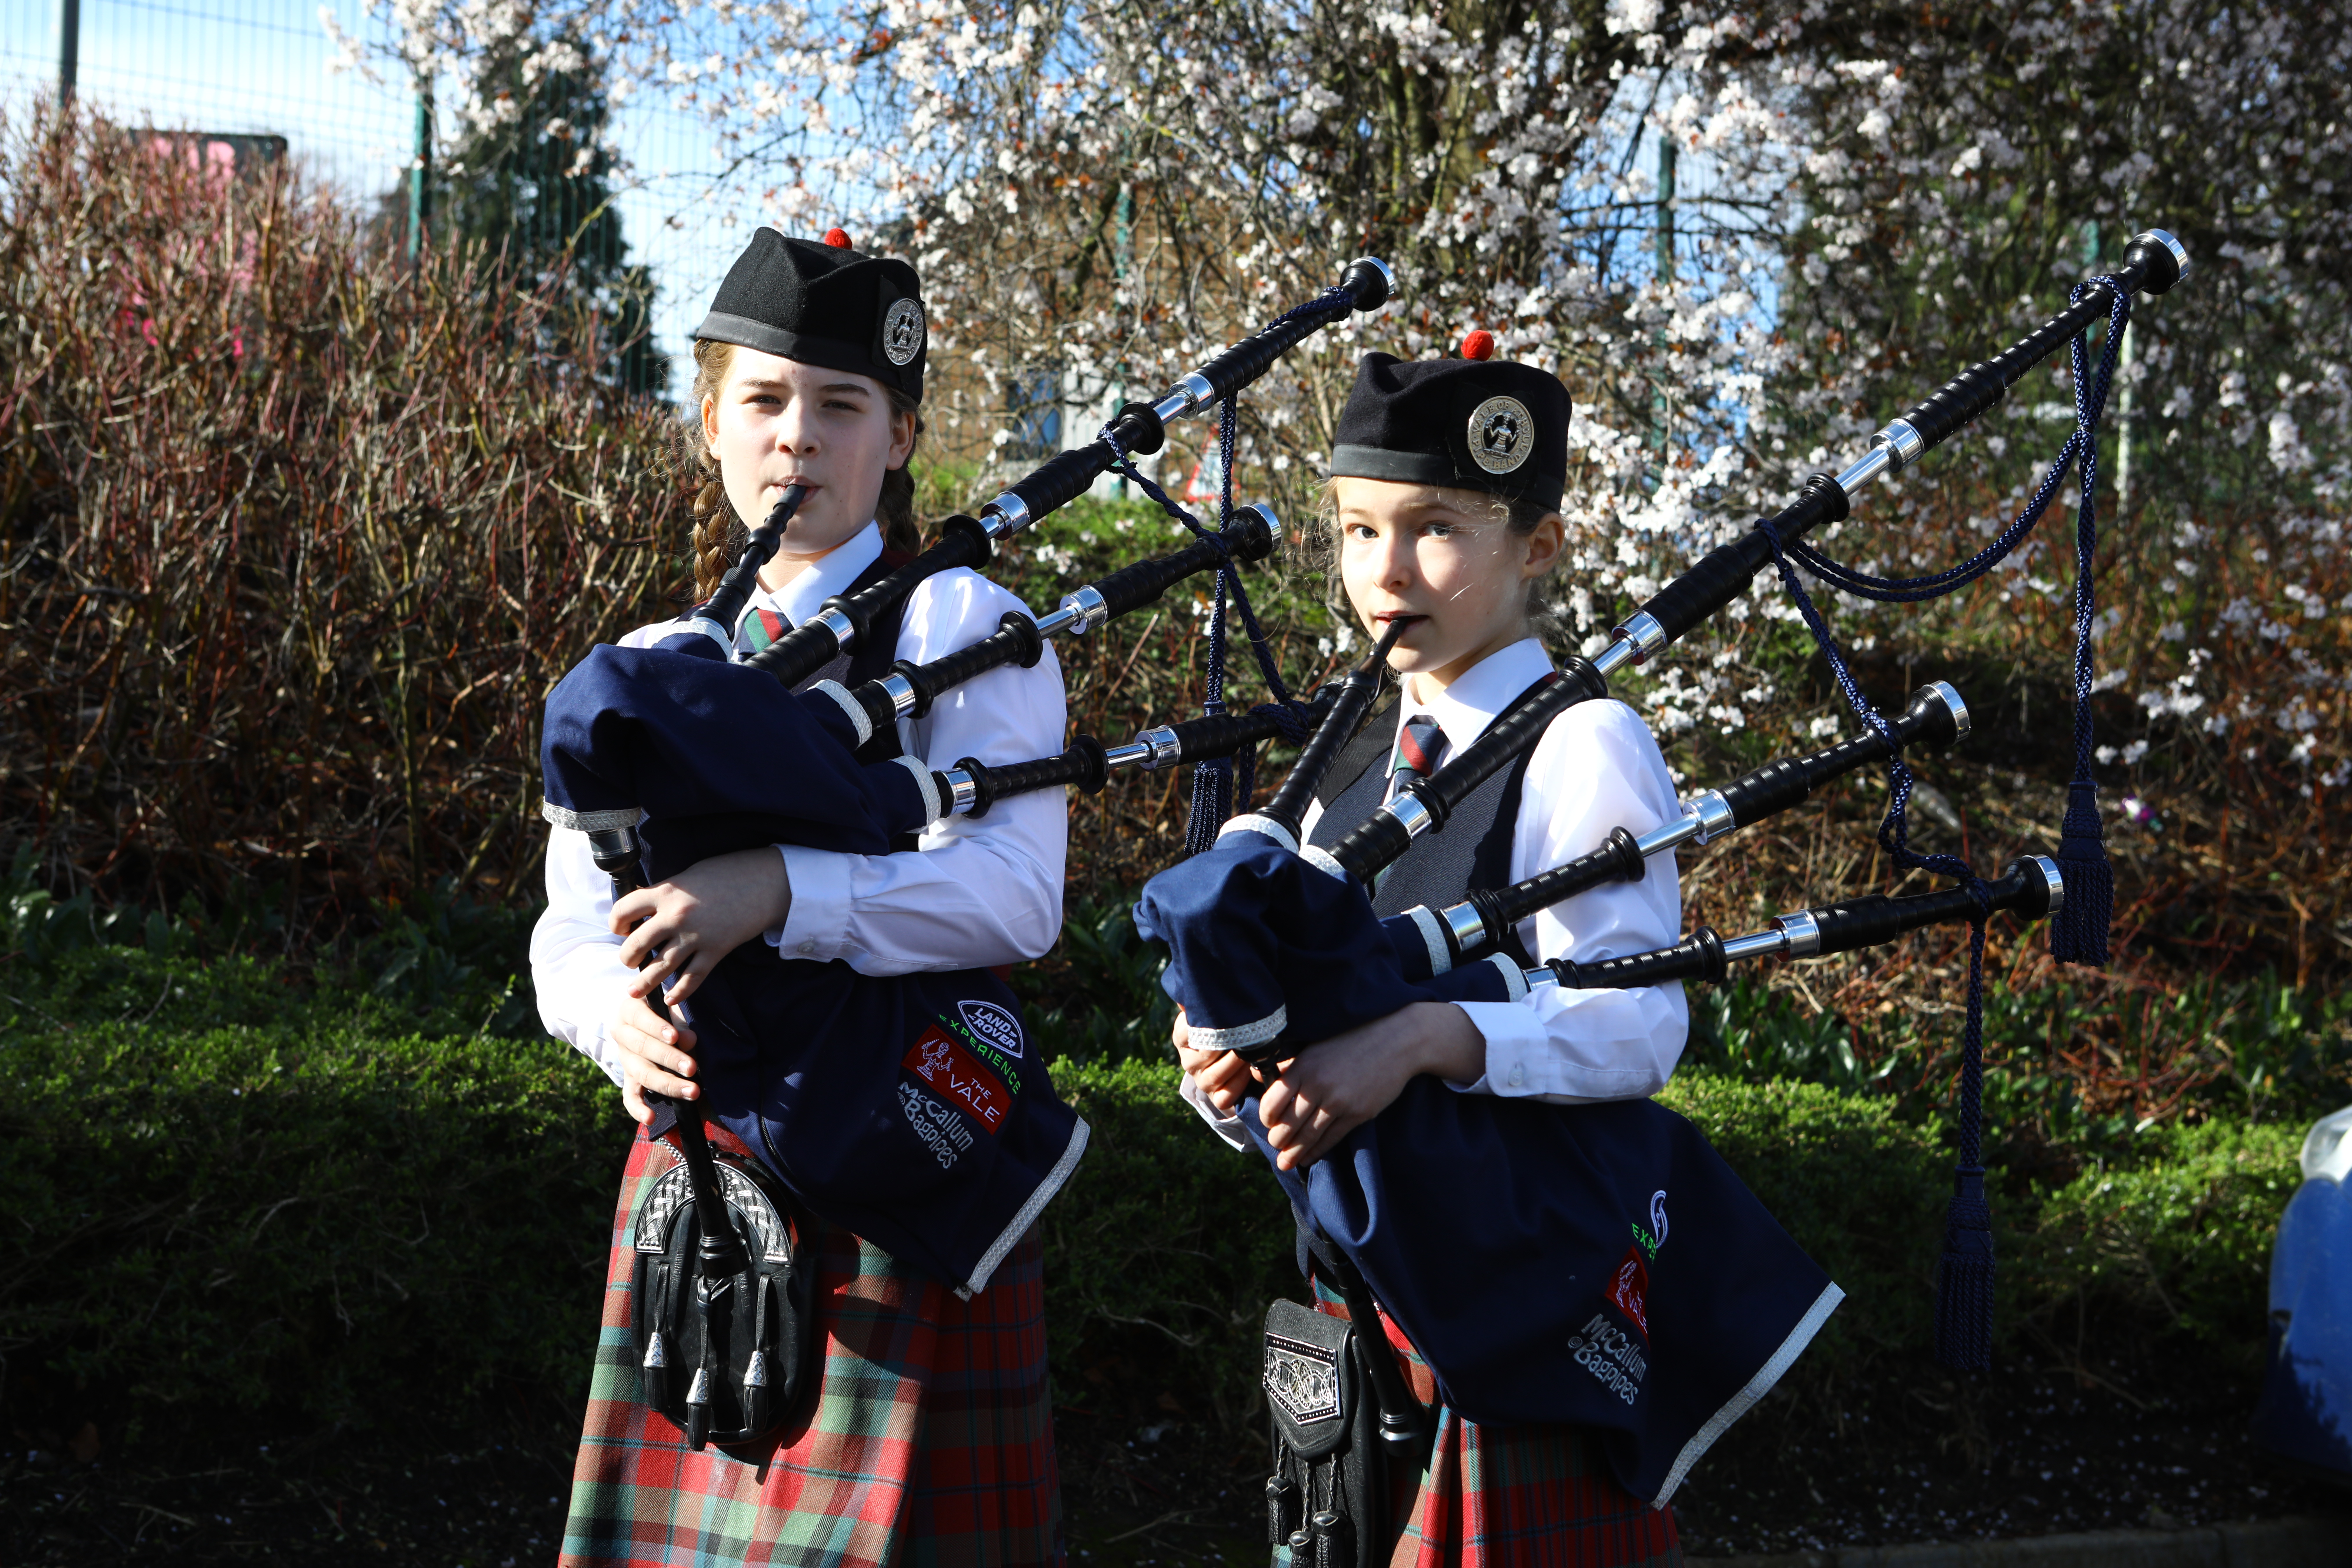 Young bagpipe players Brodie Barrie and Isla Fletcher at Perform in Perth